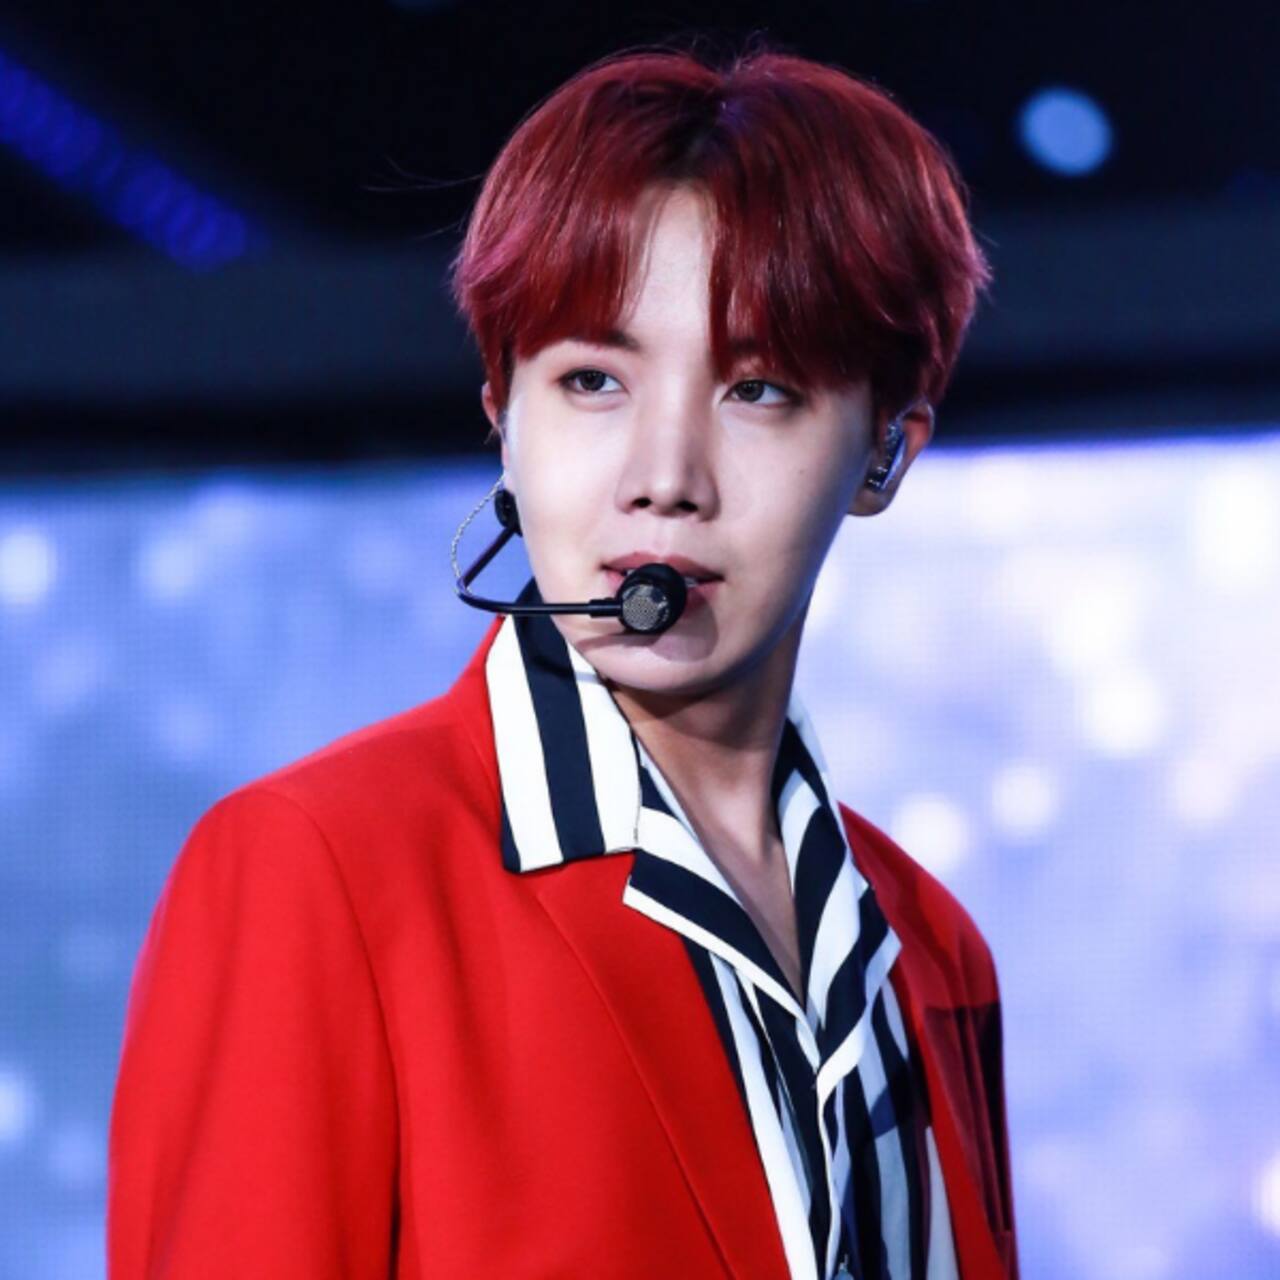 Bts J Hope Flaunts His Fake Red Hair Army Says All Men Do Is Lie View Tweets